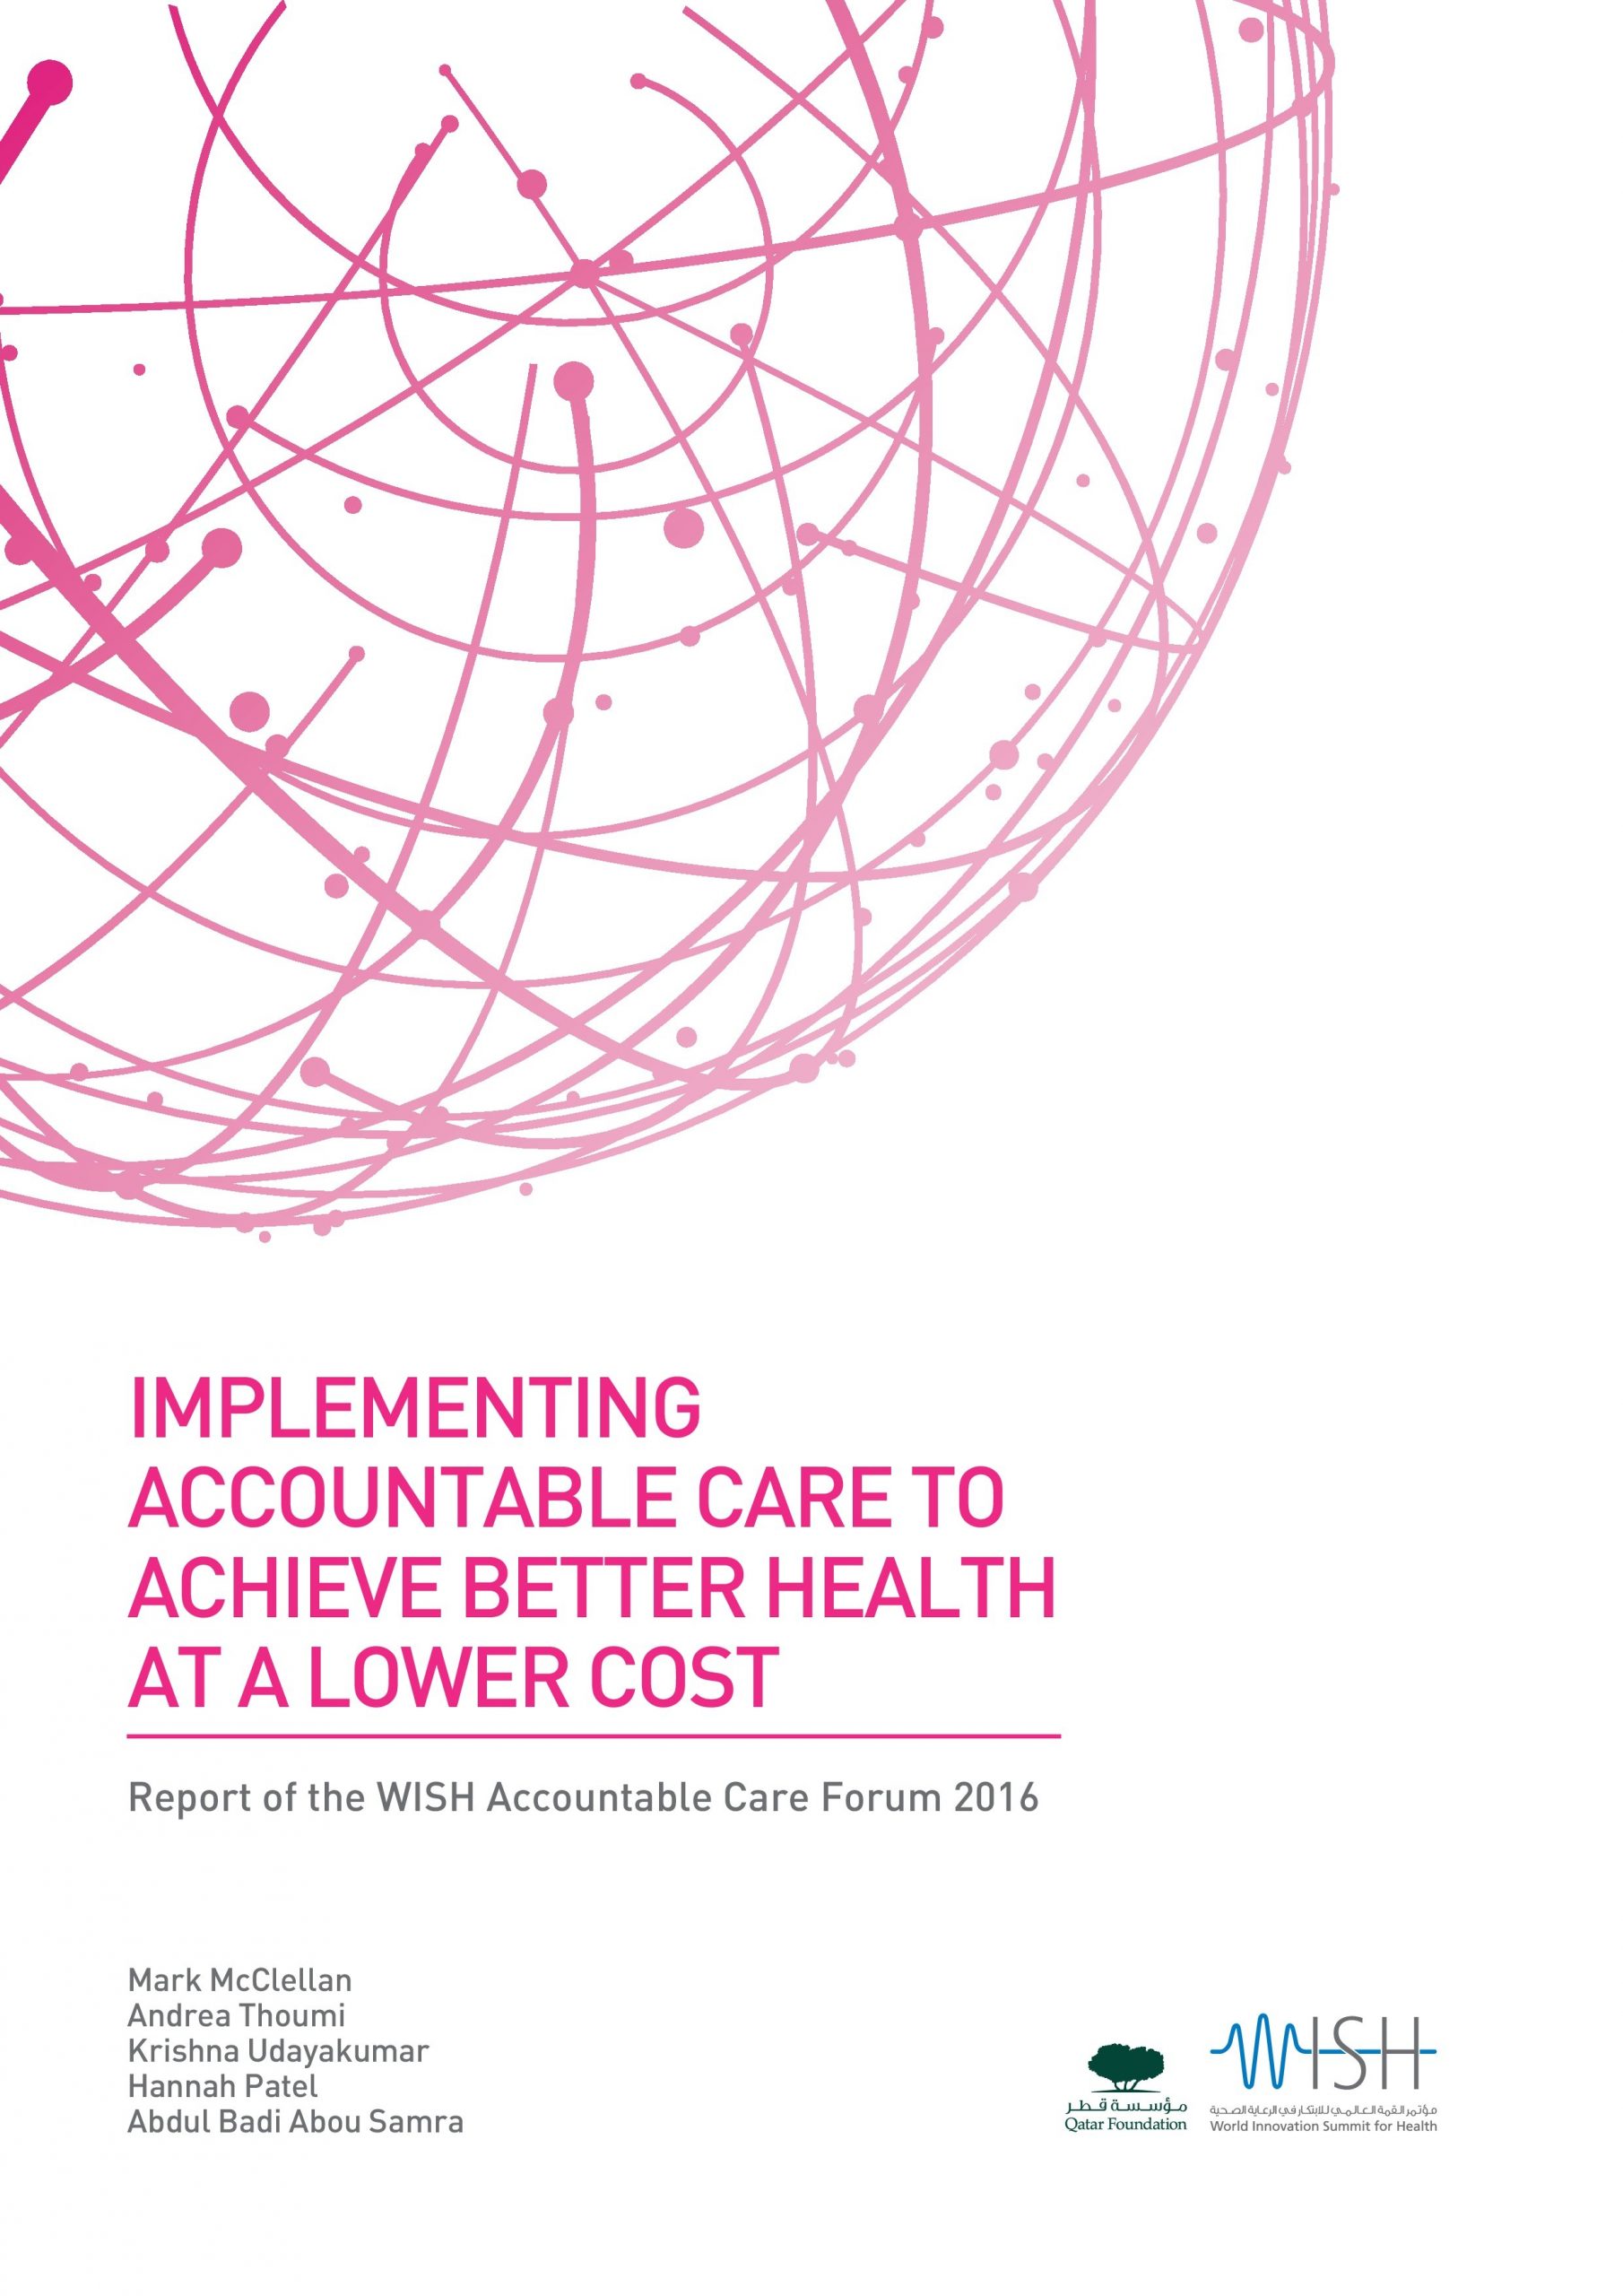 Implementing Accountable Care to Achieve Better Health at a Lower Cost